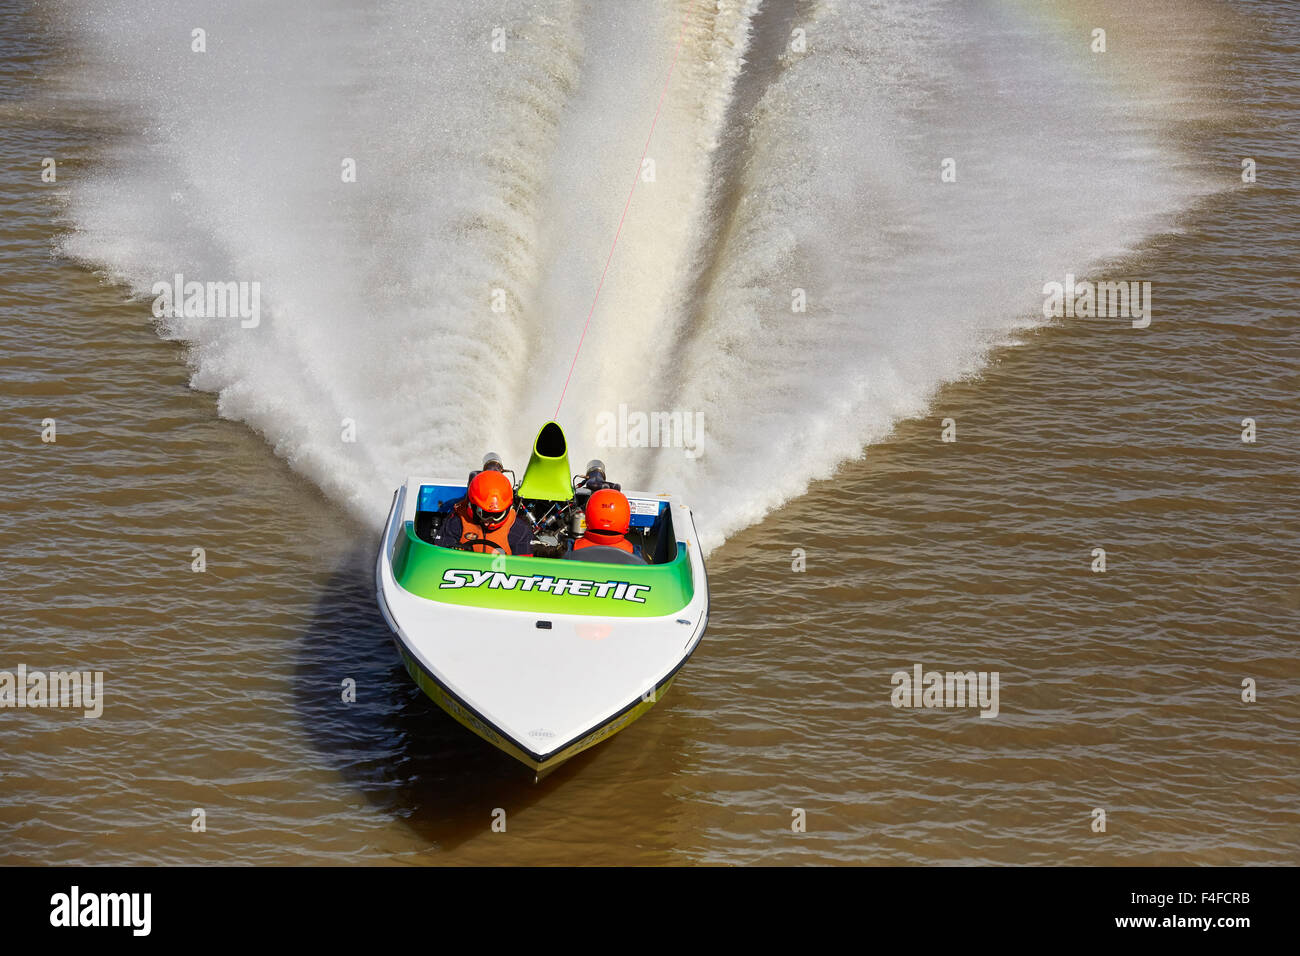 Wentworth, Australia, Saturday 17th October 2015. Ski race boat Synthetic, participating in qualifying time trial for Ted Hurley Memorial Classic Ski Race. This race starts on the Darling River at Wentworth, then turns into the Murray River and races to Mildura, before  returning to  Wentworth and the finish. Credit: Ian Mckenzie/Alamy Live News Stock Photo